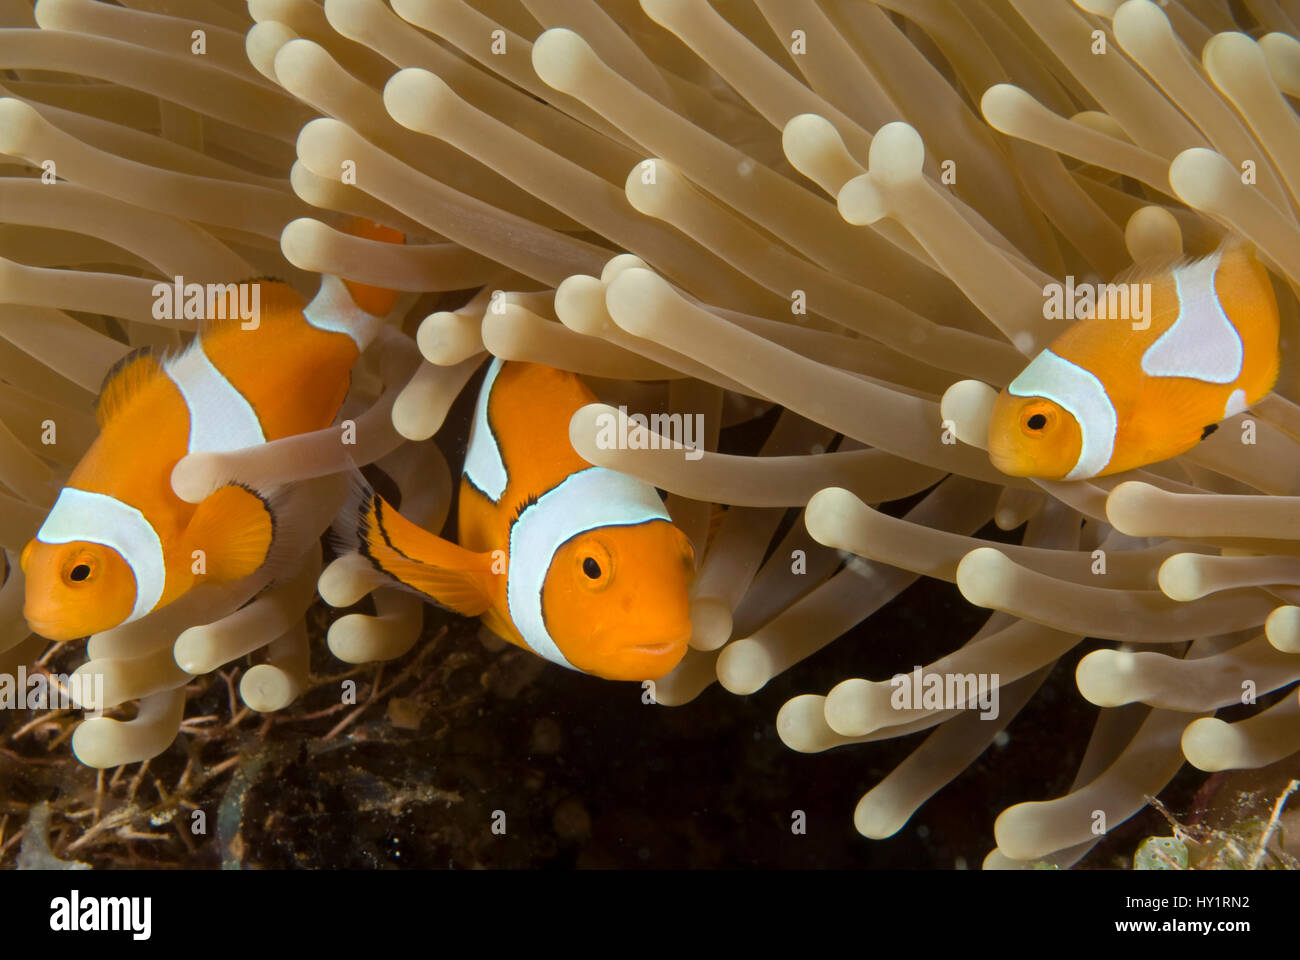 Clown anemonefish (Amphiprion percula) amongst anemone tentacles, Indo-pacific. Stock Photo